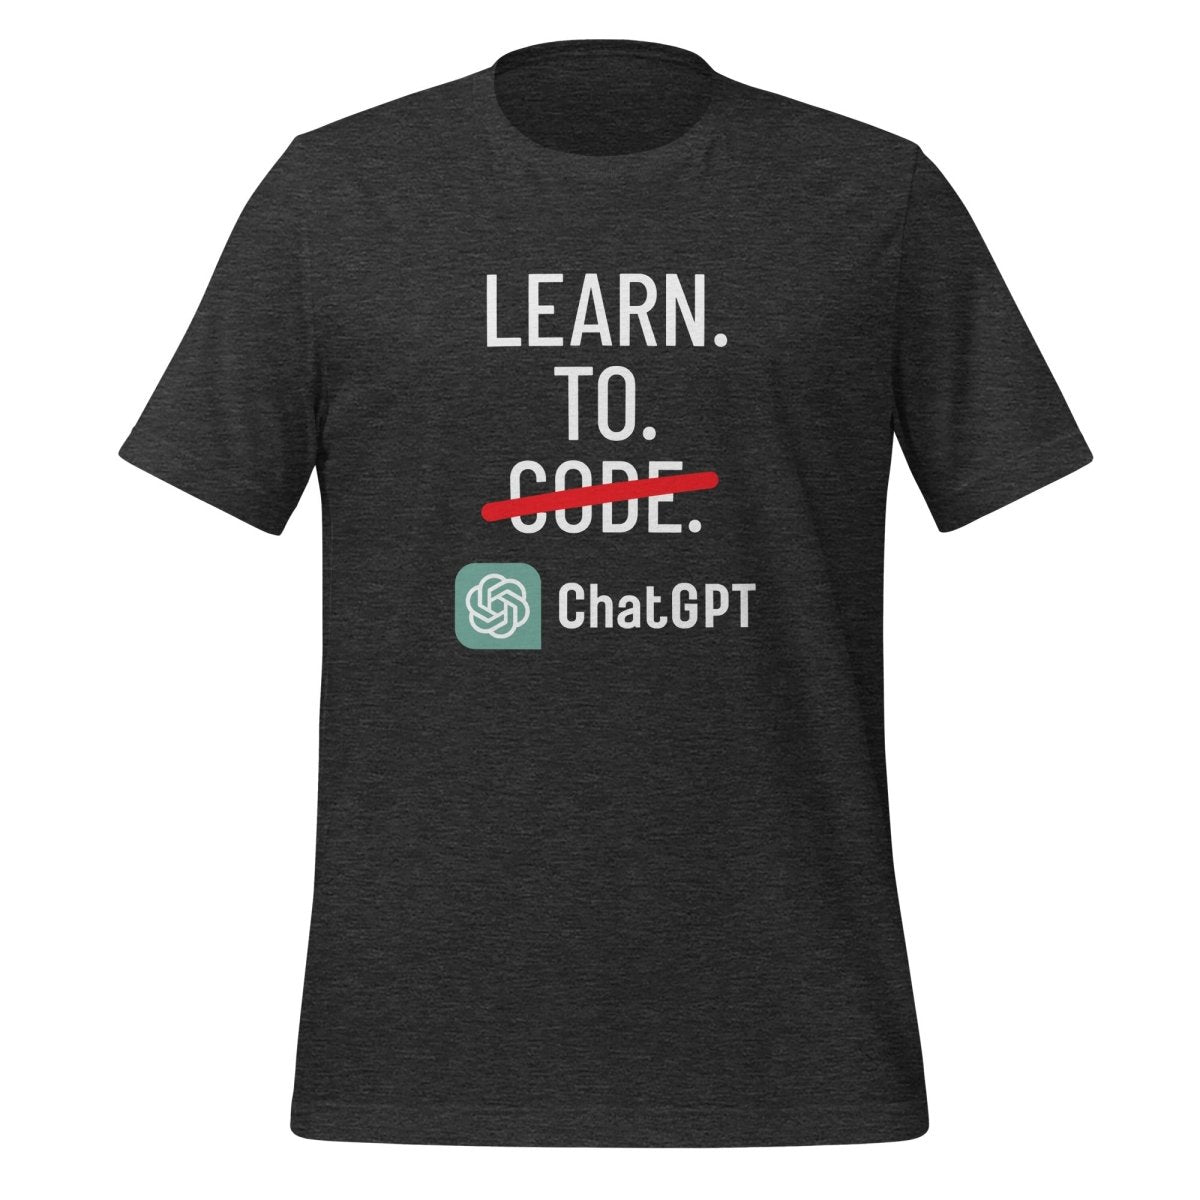 Learn to Code with ChatGPT T - Shirt (unisex) - Dark Grey Heather - AI Store